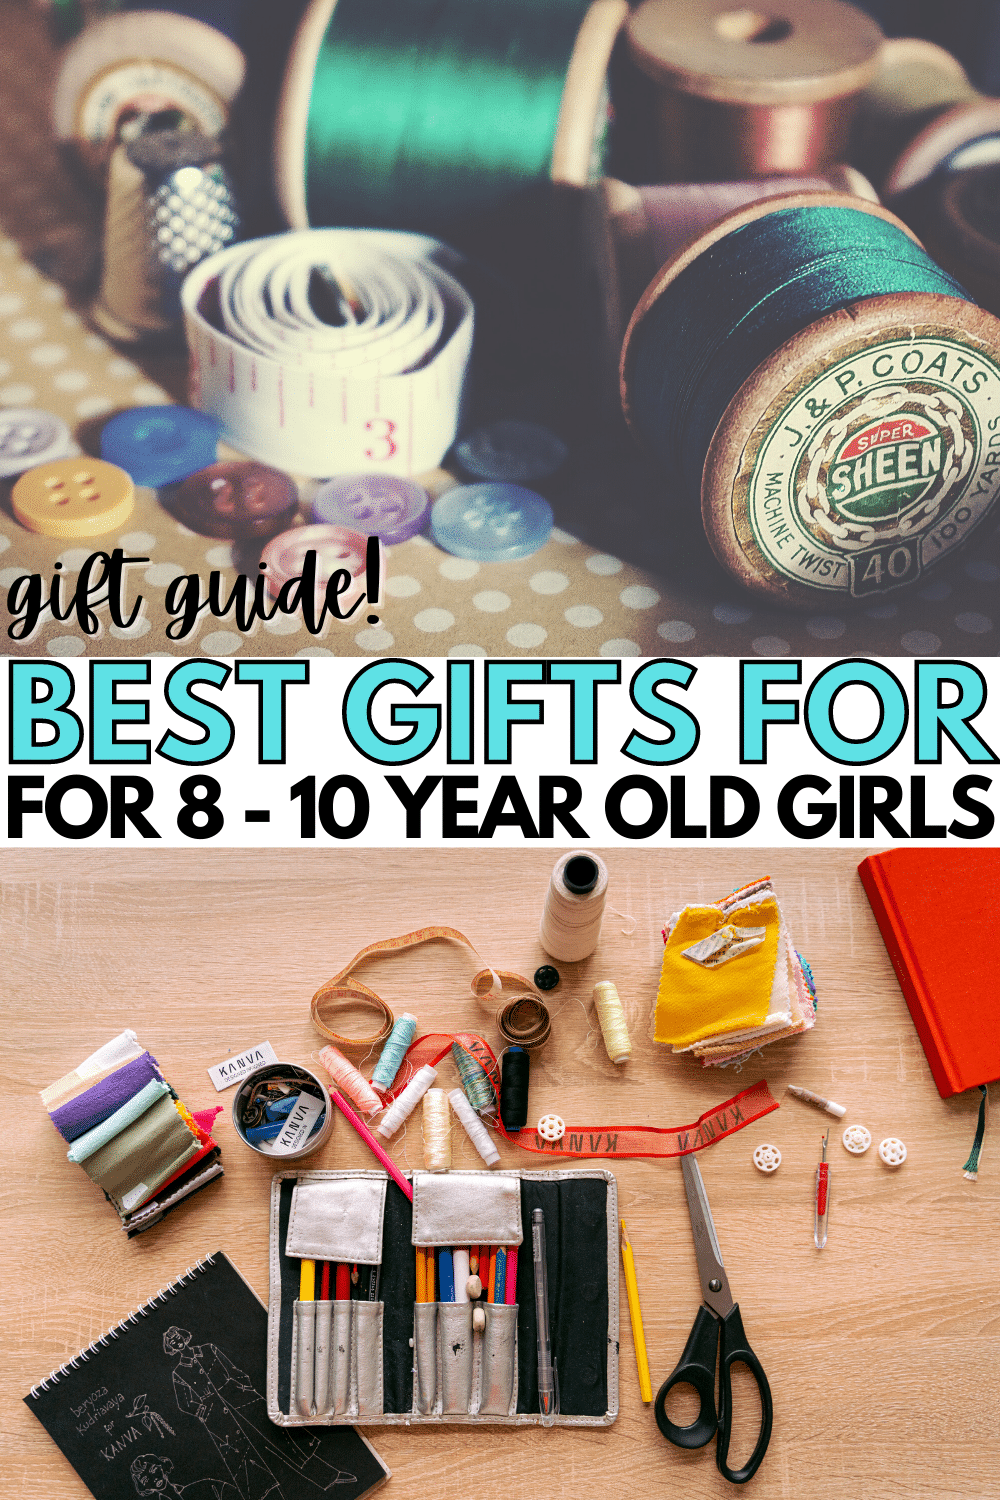 Best Gifts for 8-10 Year Old Girls with a title text reading Gift Guide! Best Gifts For for 8-10 year old girls